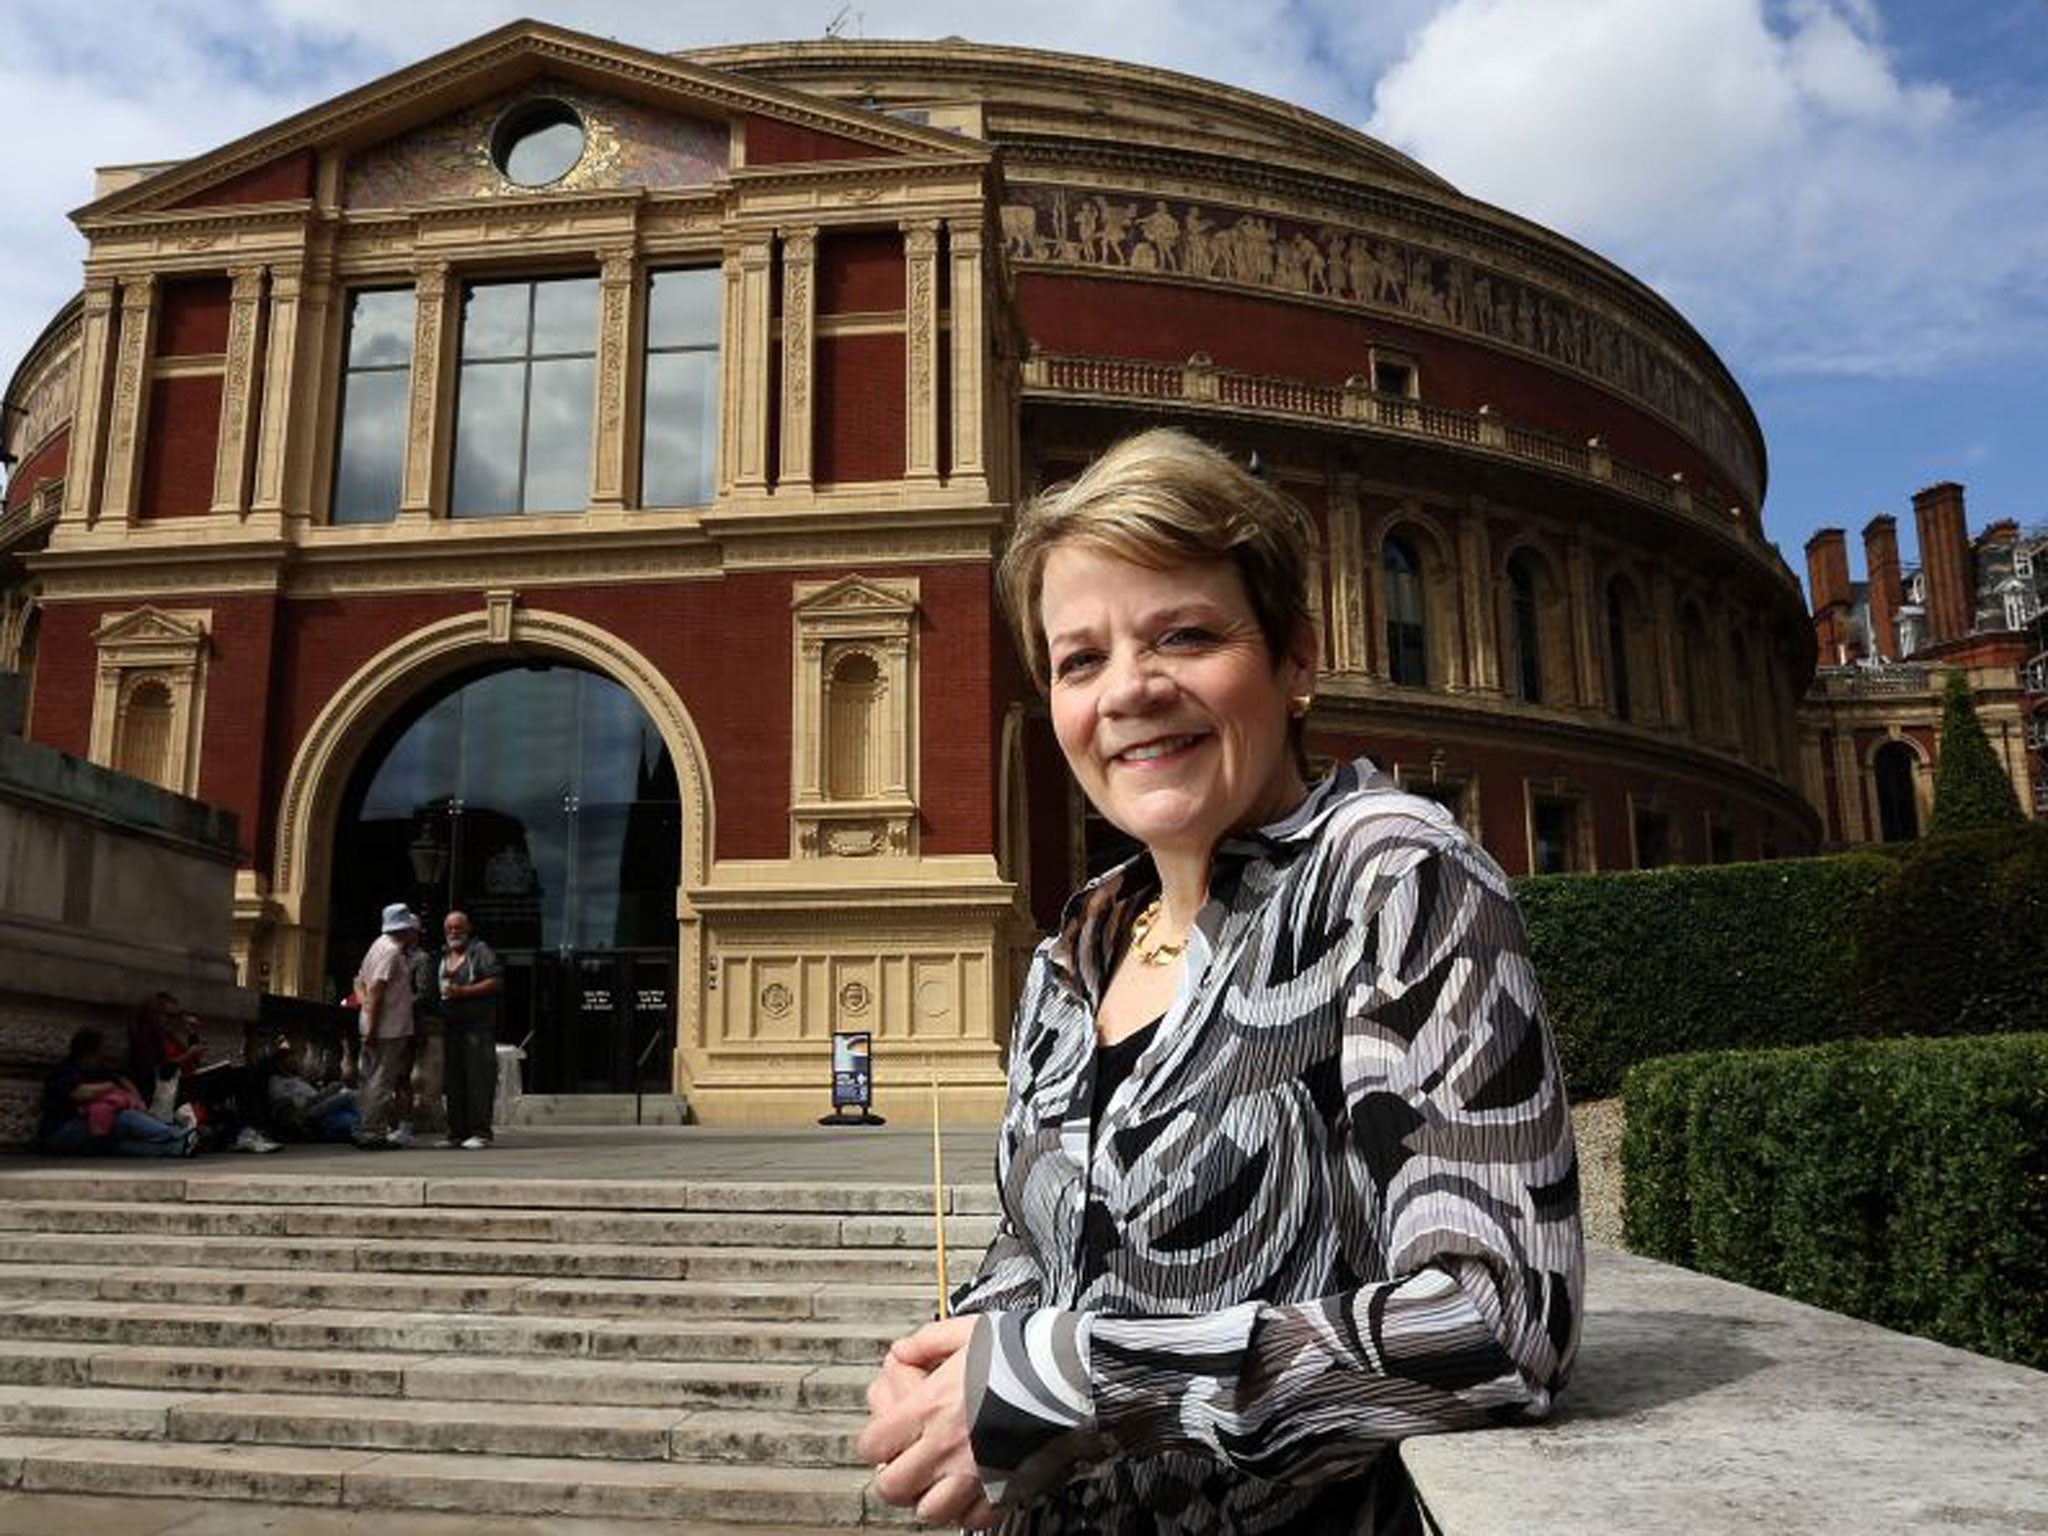 American conductor Marin Alsop outside the Royal Albert Hall